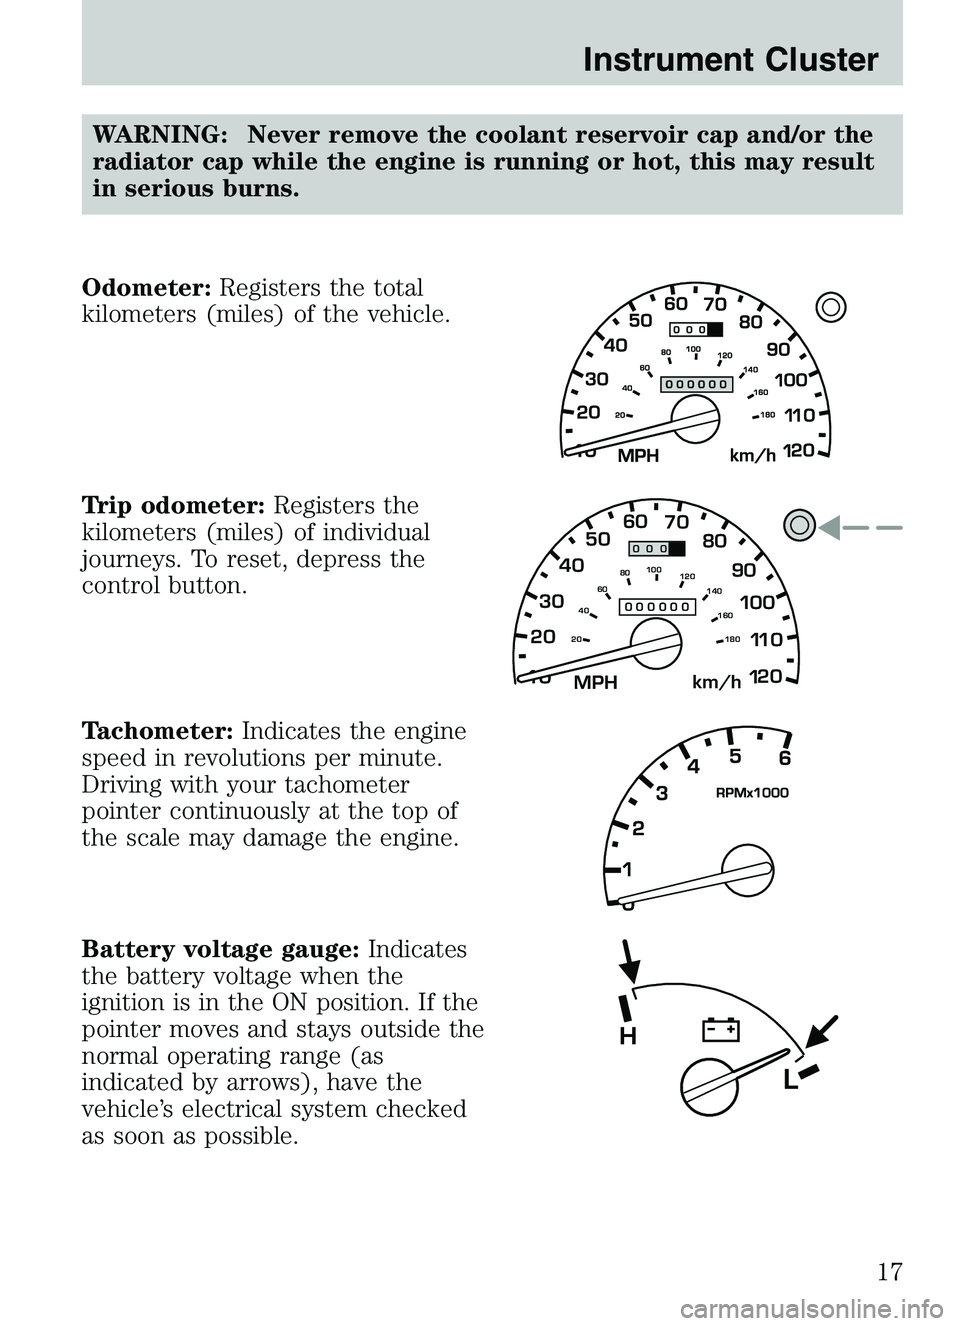 MAZDA MODEL B4000 2003  Owners Manual WARNING: Never remove the coolant reservoir cap and/or the
radiator cap while the engine is running or hot, this may result
in serious burns.
Odometer: Registers the total
kilometers (miles) of the ve